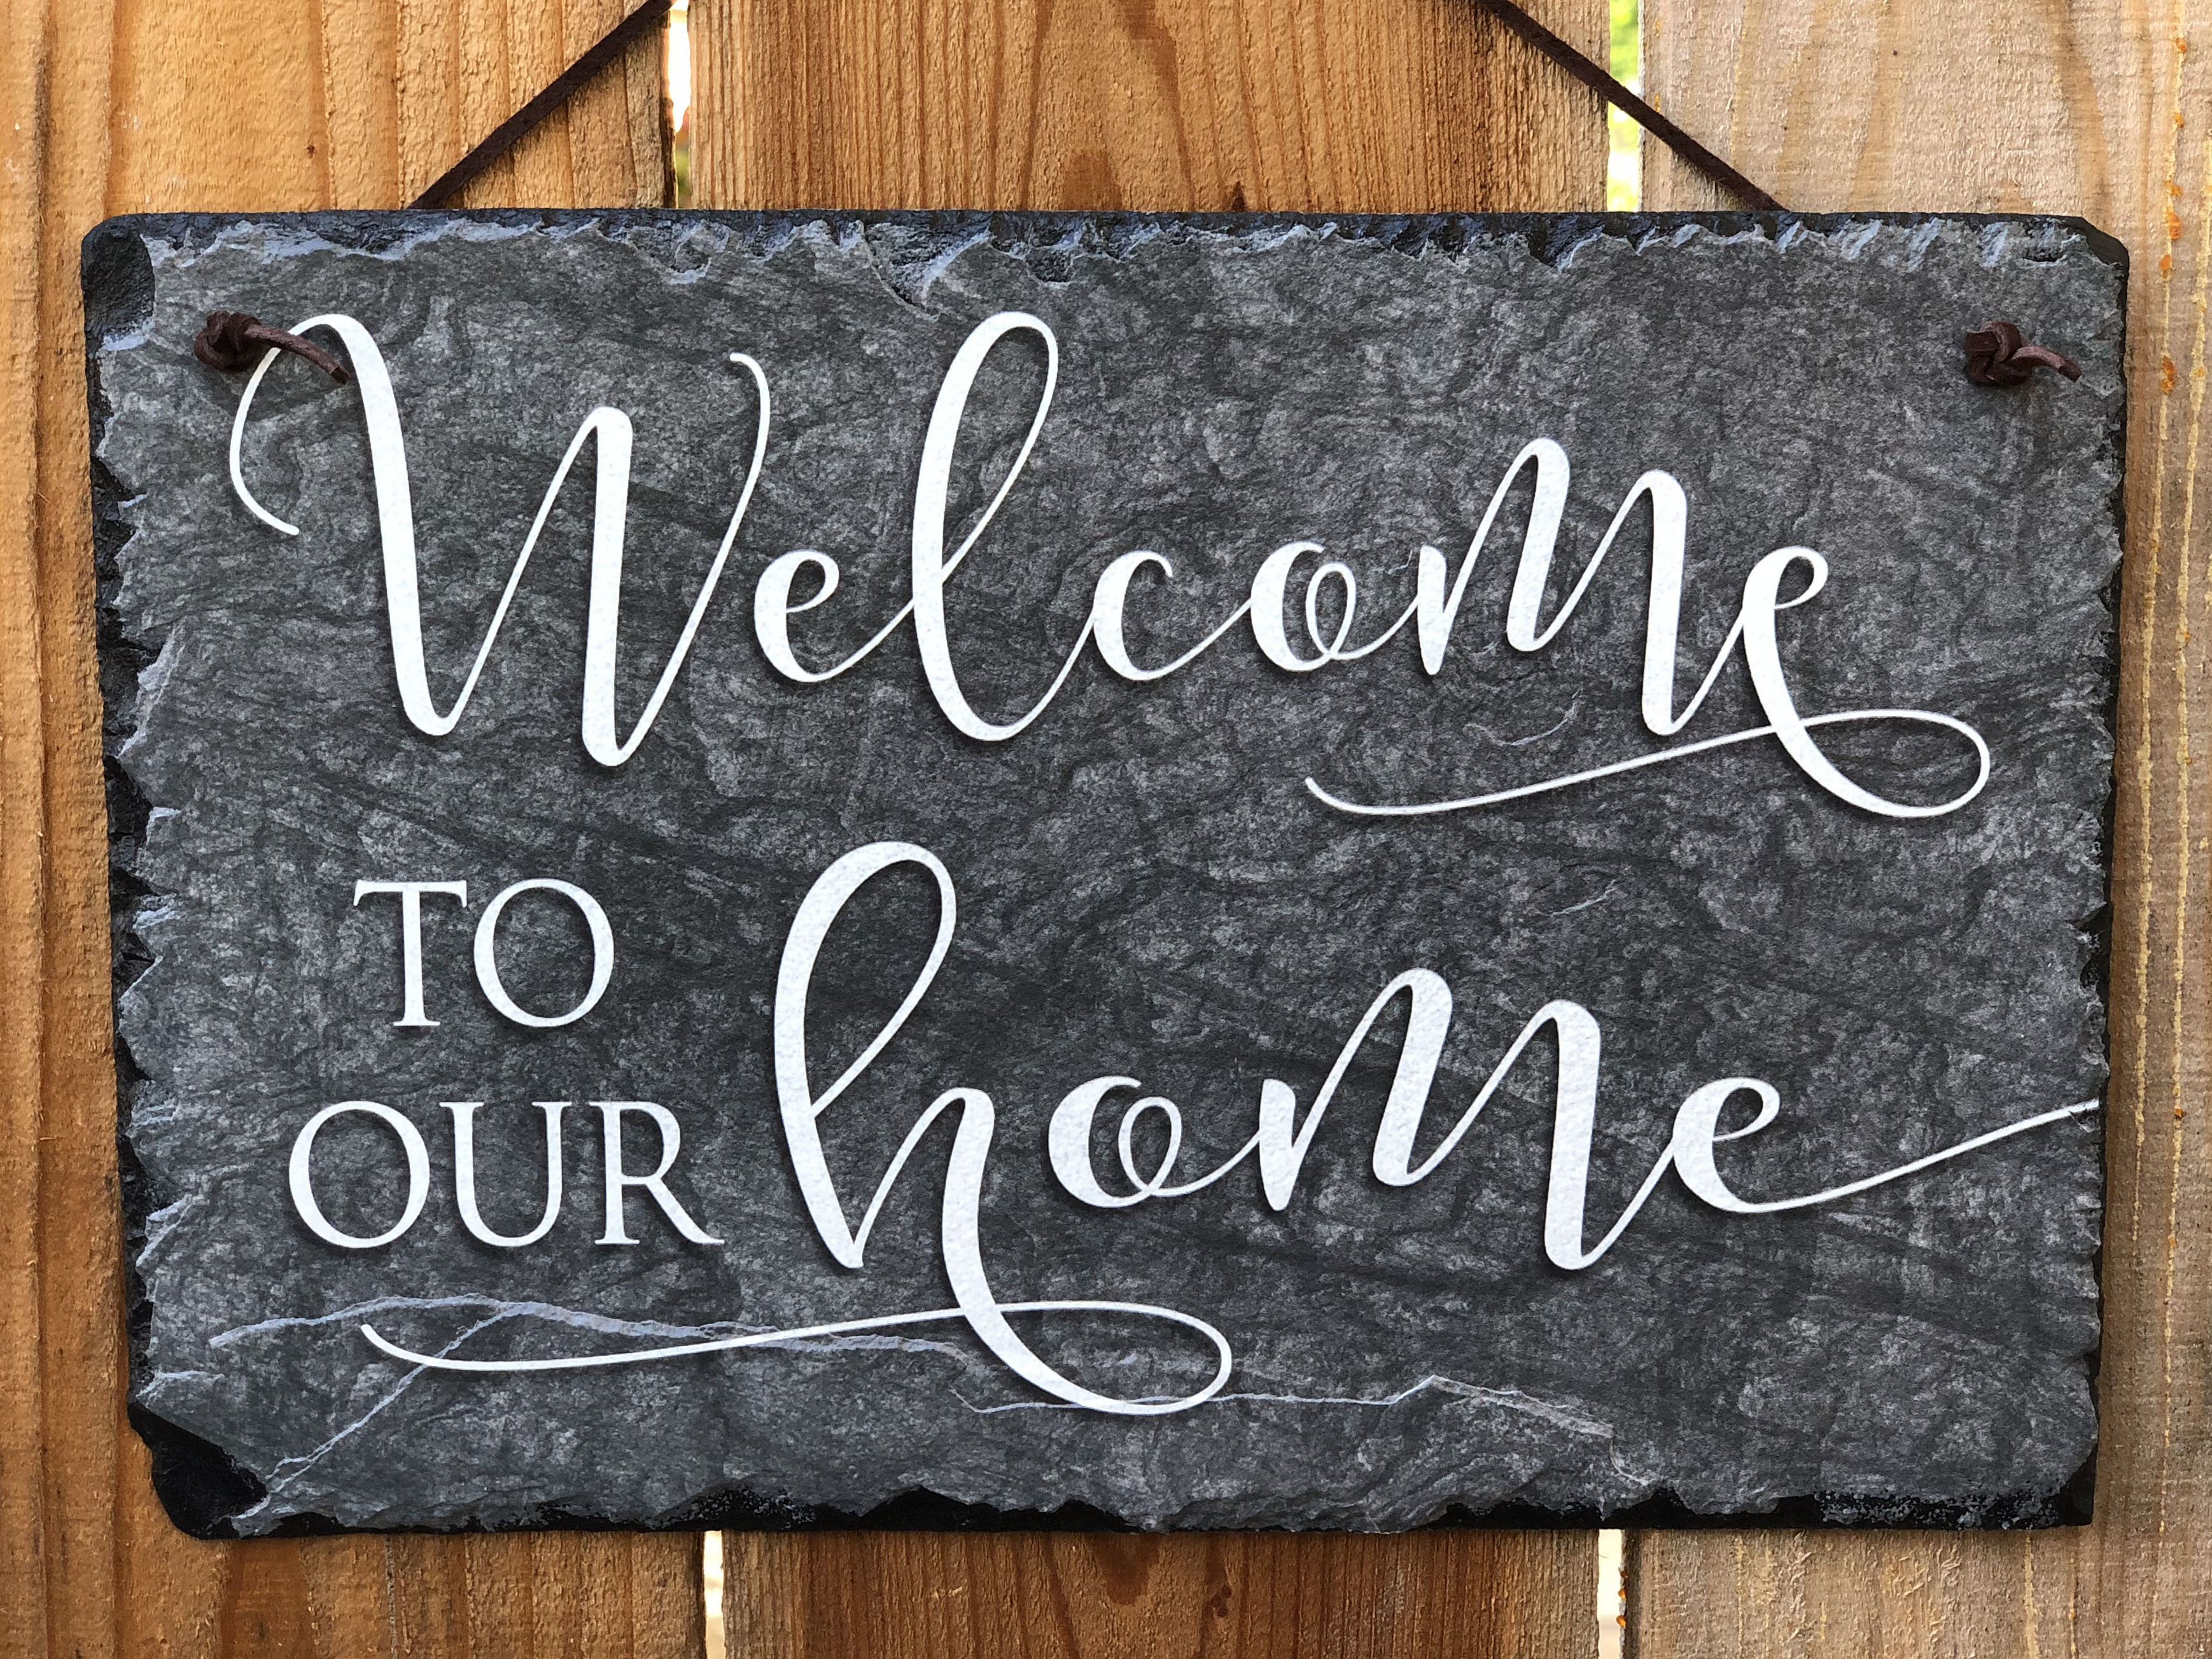 Welcome To Our Home Wall Decor | Wayfair.ca Pertaining To In A Word "welcome" Wall Decor By Fireside Home (Photo 11 of 30)